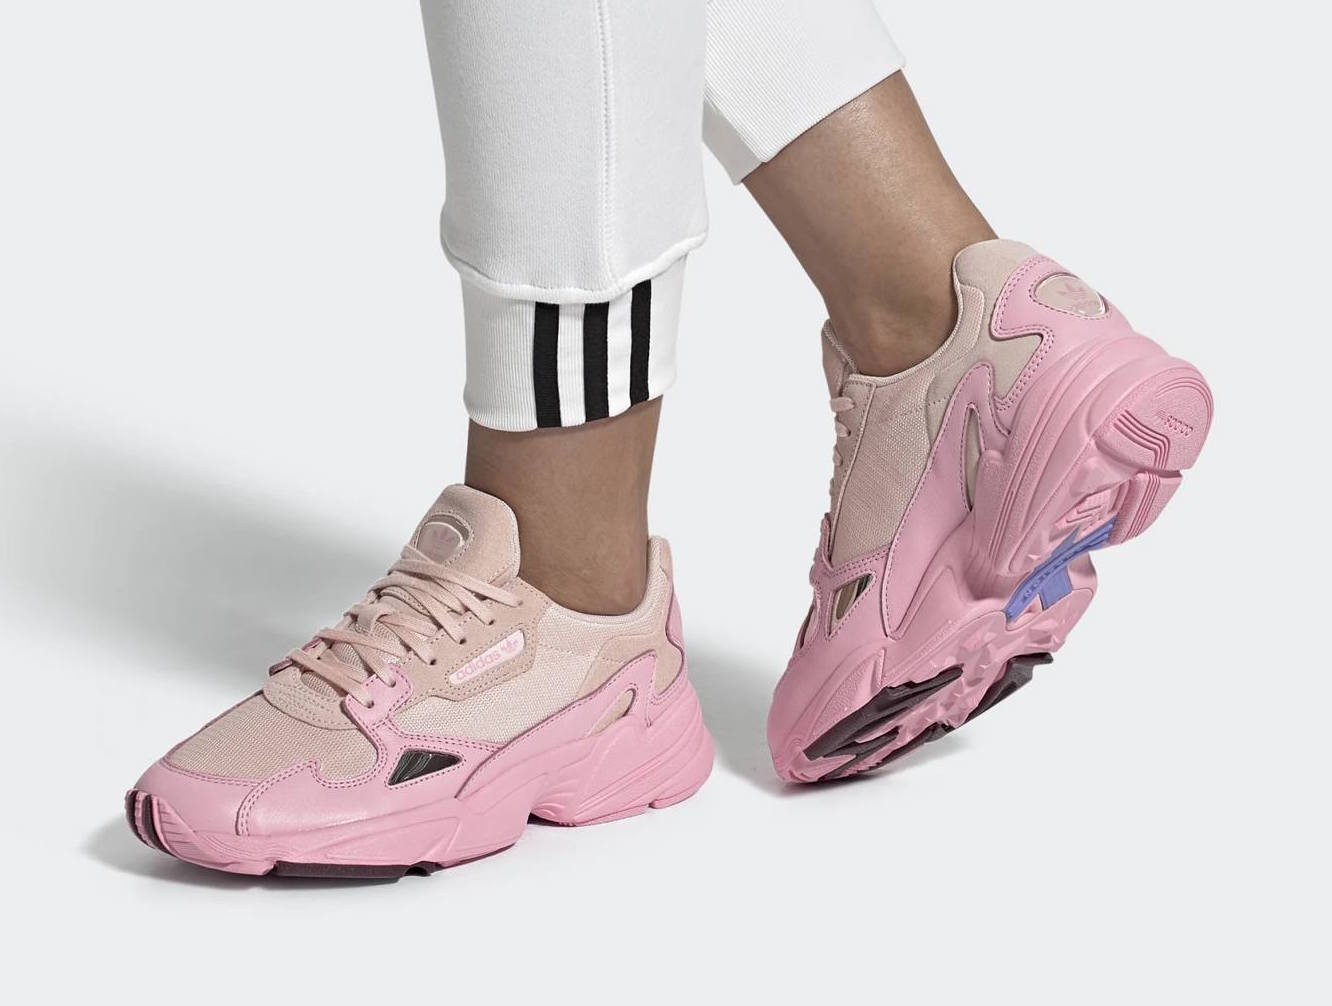 adidas Falcon in ‘Rose Pink’